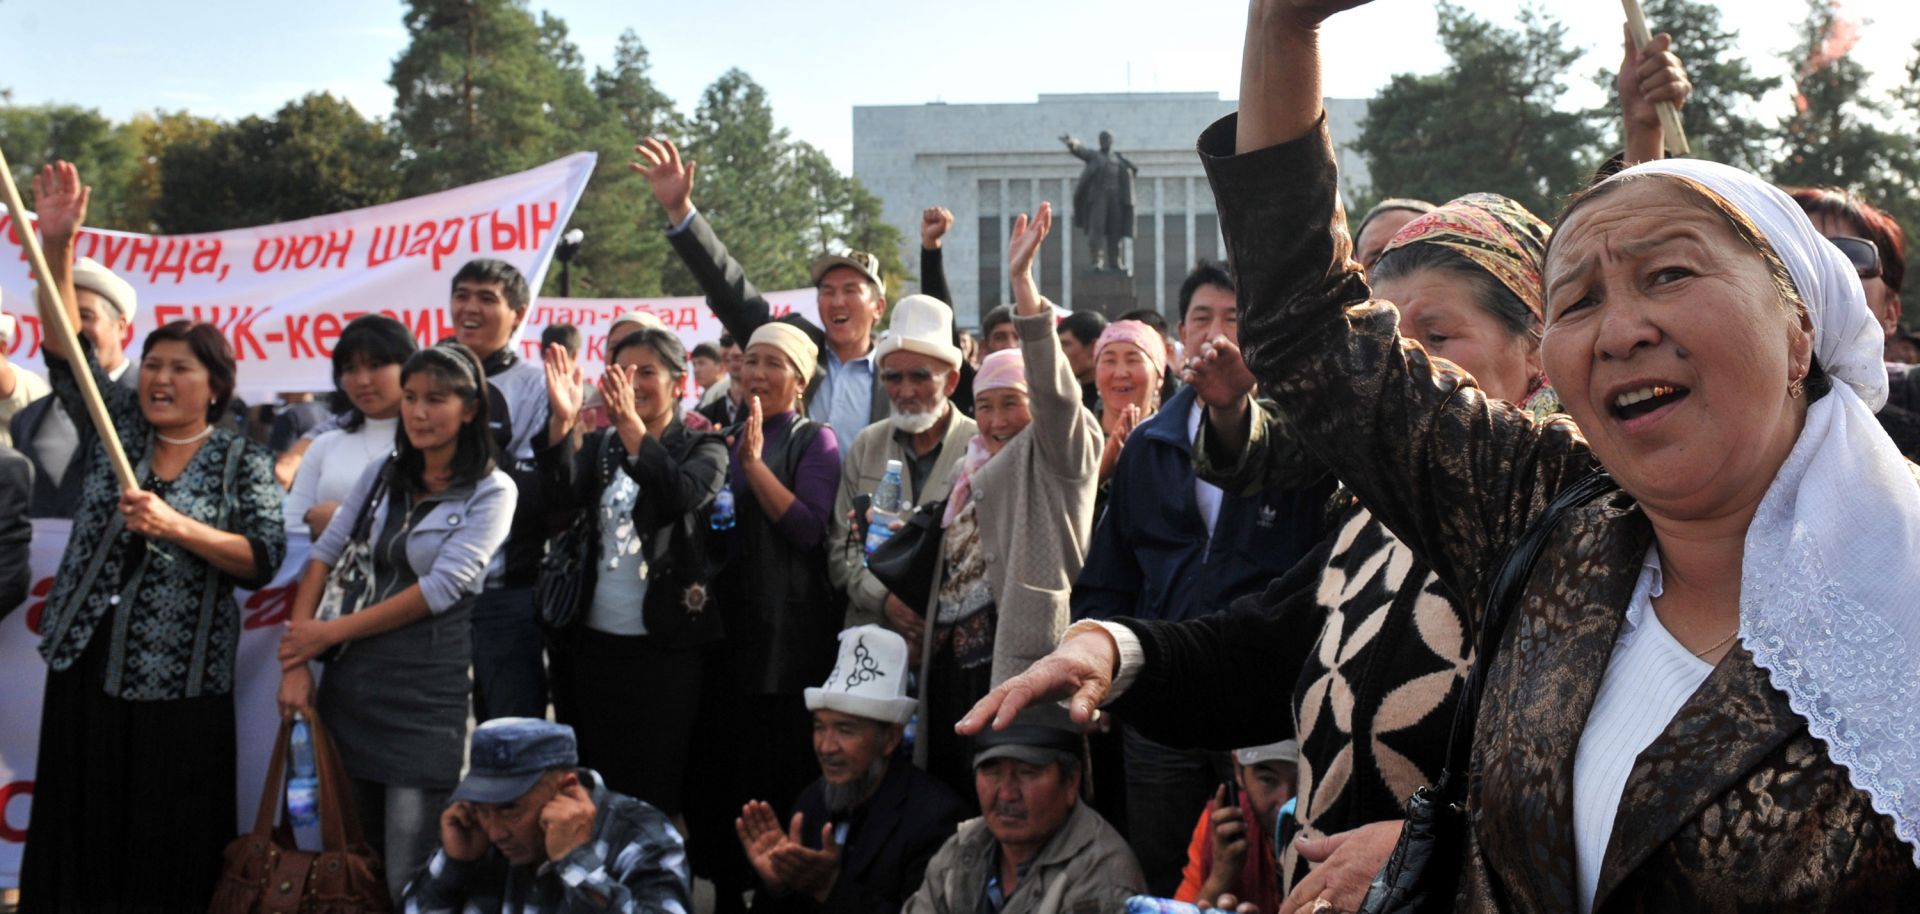 Supporters of the Kyrgyz Byutun party shout during their protest against the results of the Parliamentary elections in Bishkek on October 18, 2010.